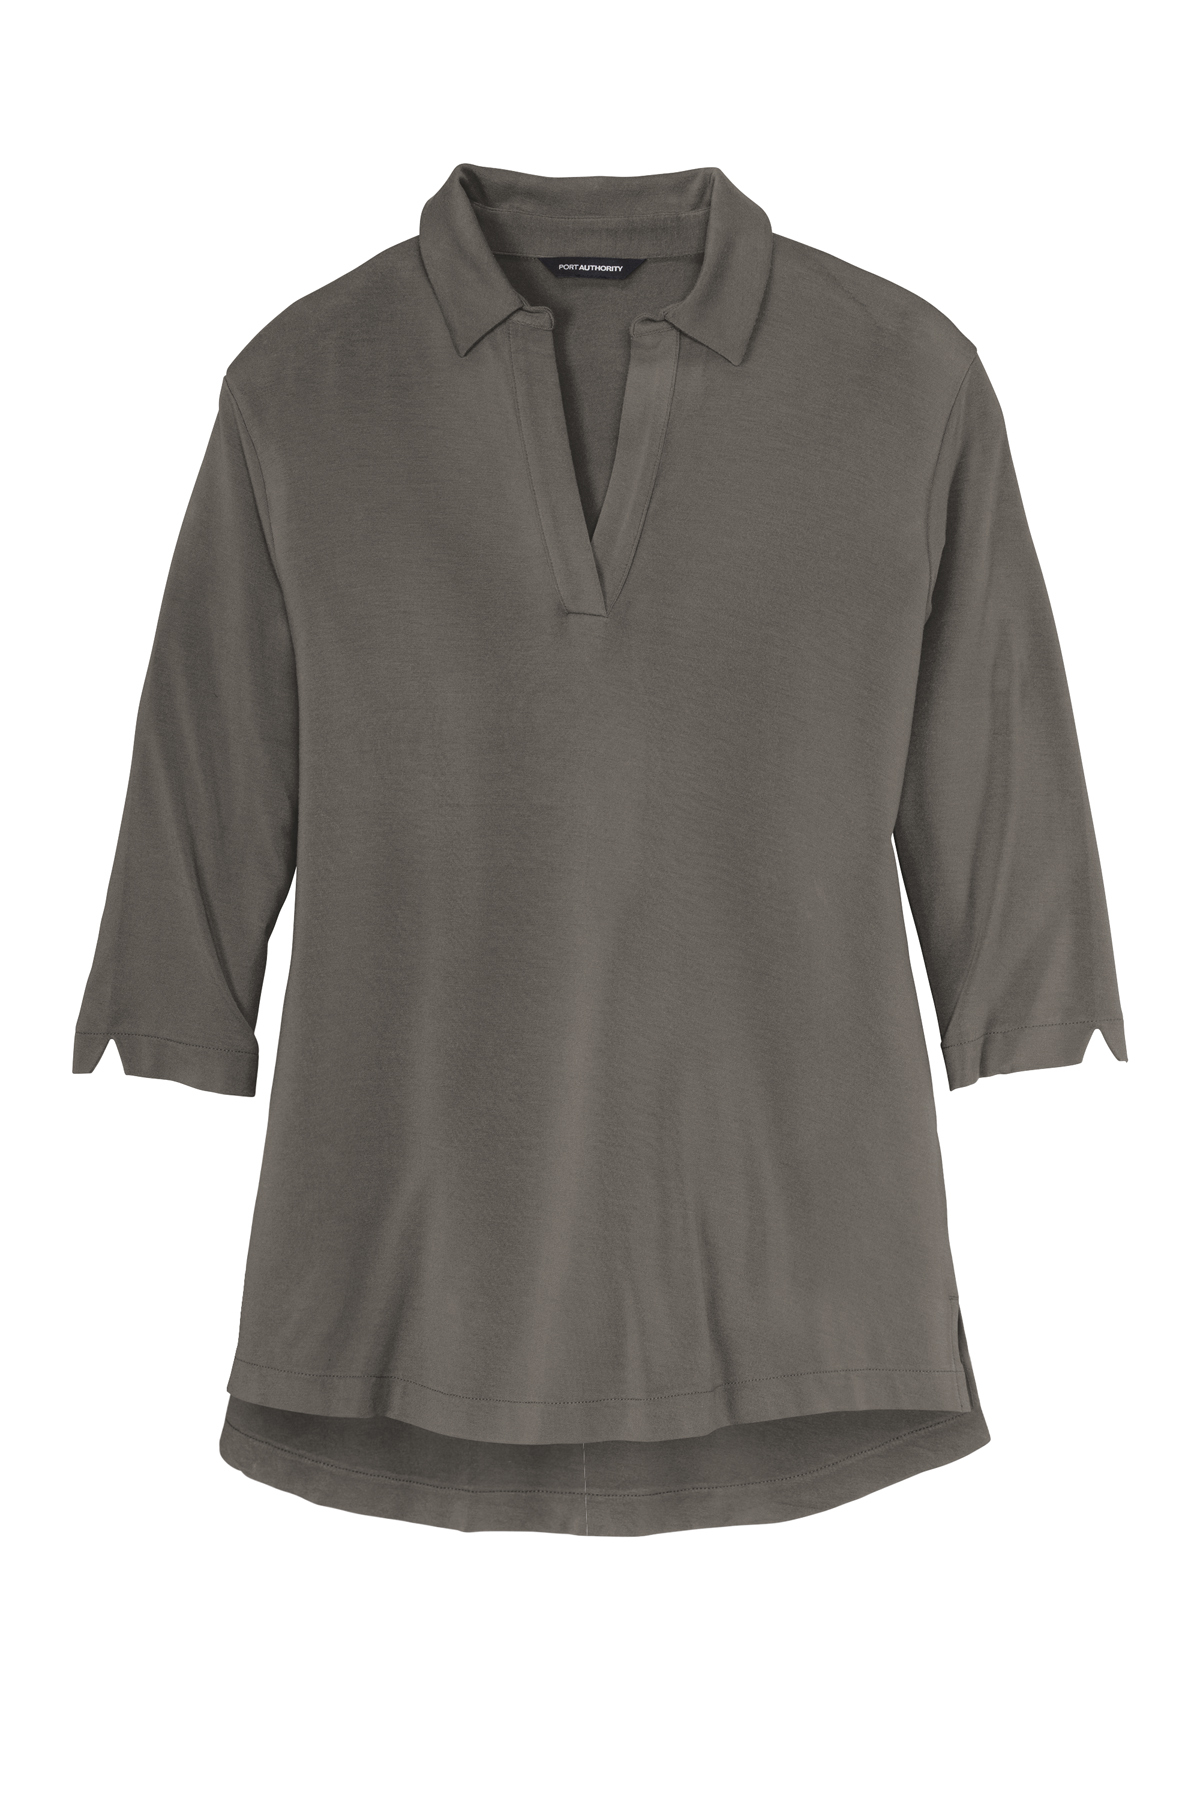 Product | Tunic Luxe | Knit Port Authority Ladies Authority Port